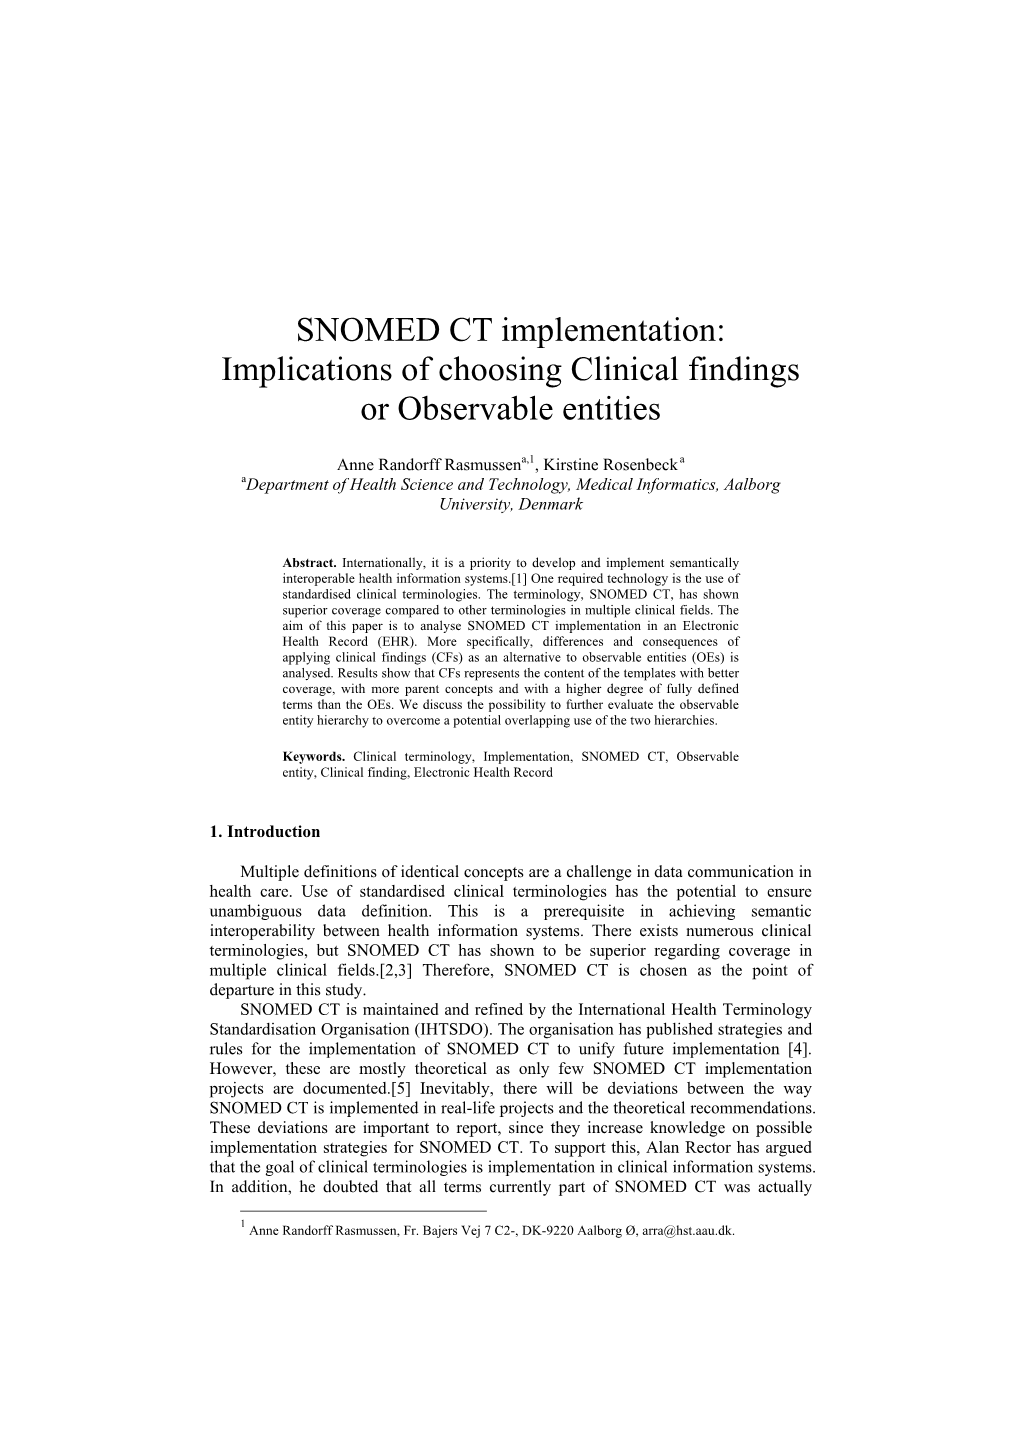 SNOMED CT Implementation: Implications of Choosing Clinical Findings Or Observable Entities